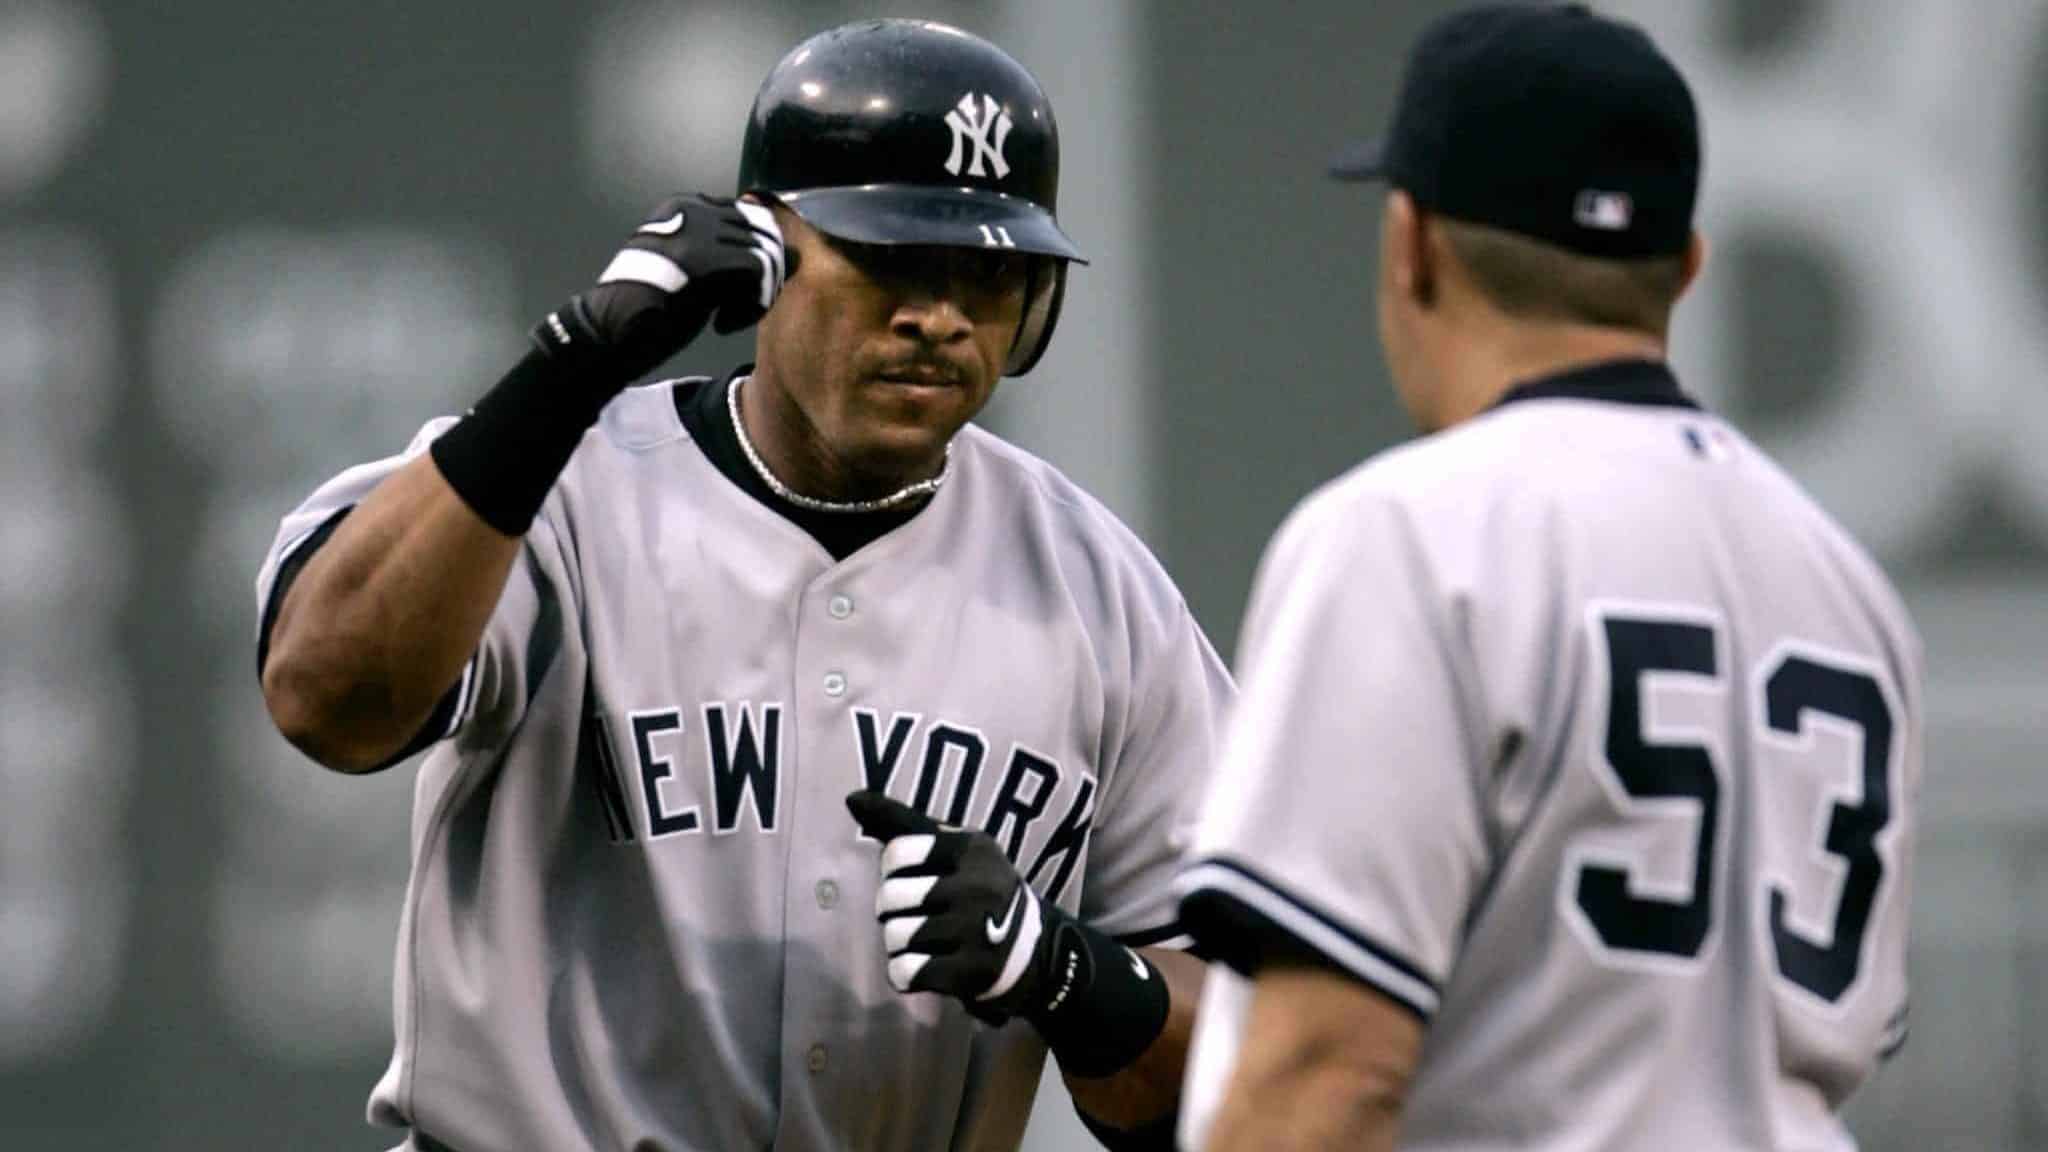 Gary Sheffield 2020 Hall of Fame vote